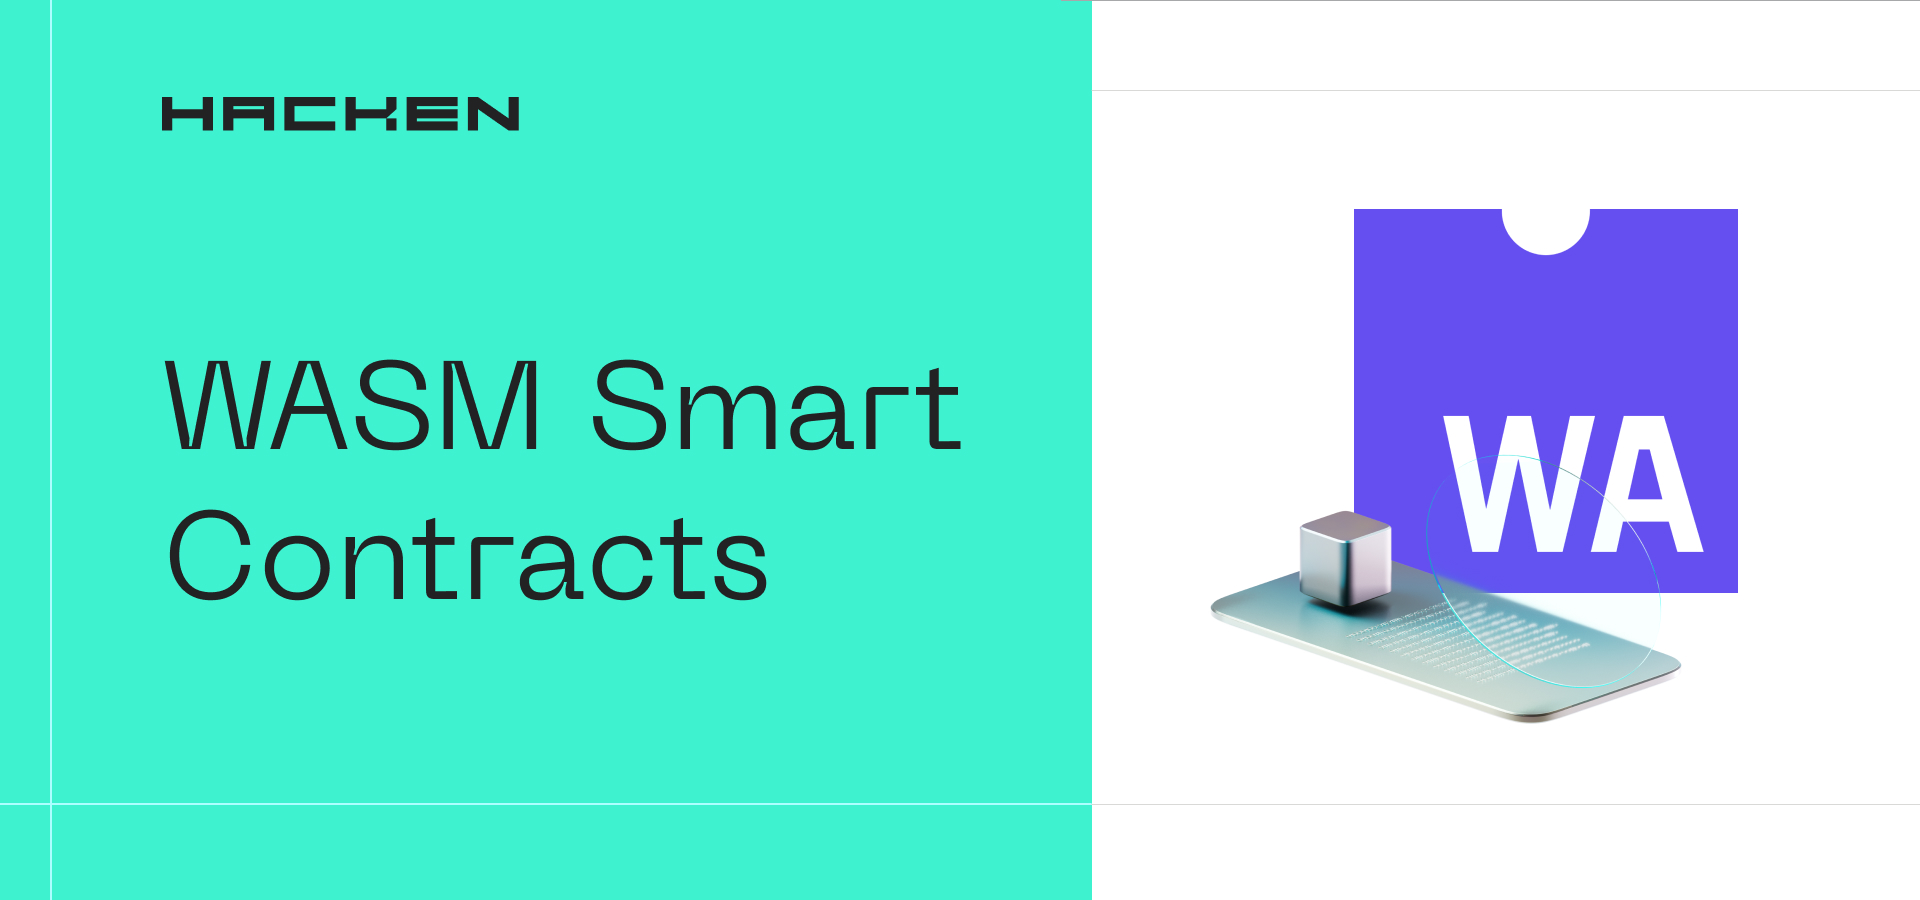 WASM Smart Contracts